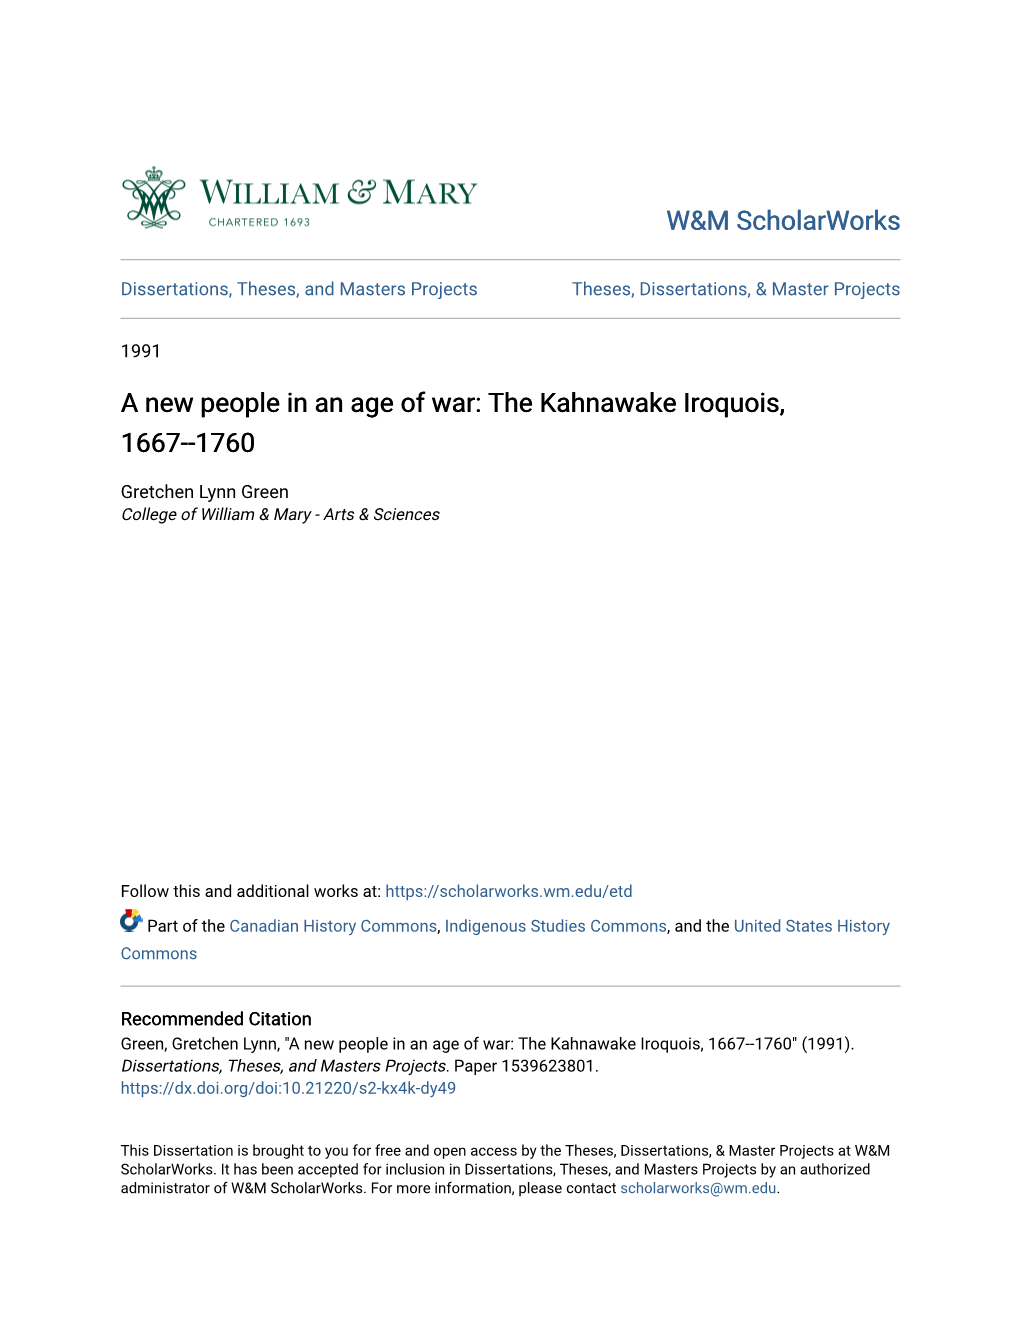 A New People in an Age of War: the Kahnawake Iroquois, 1667--1760